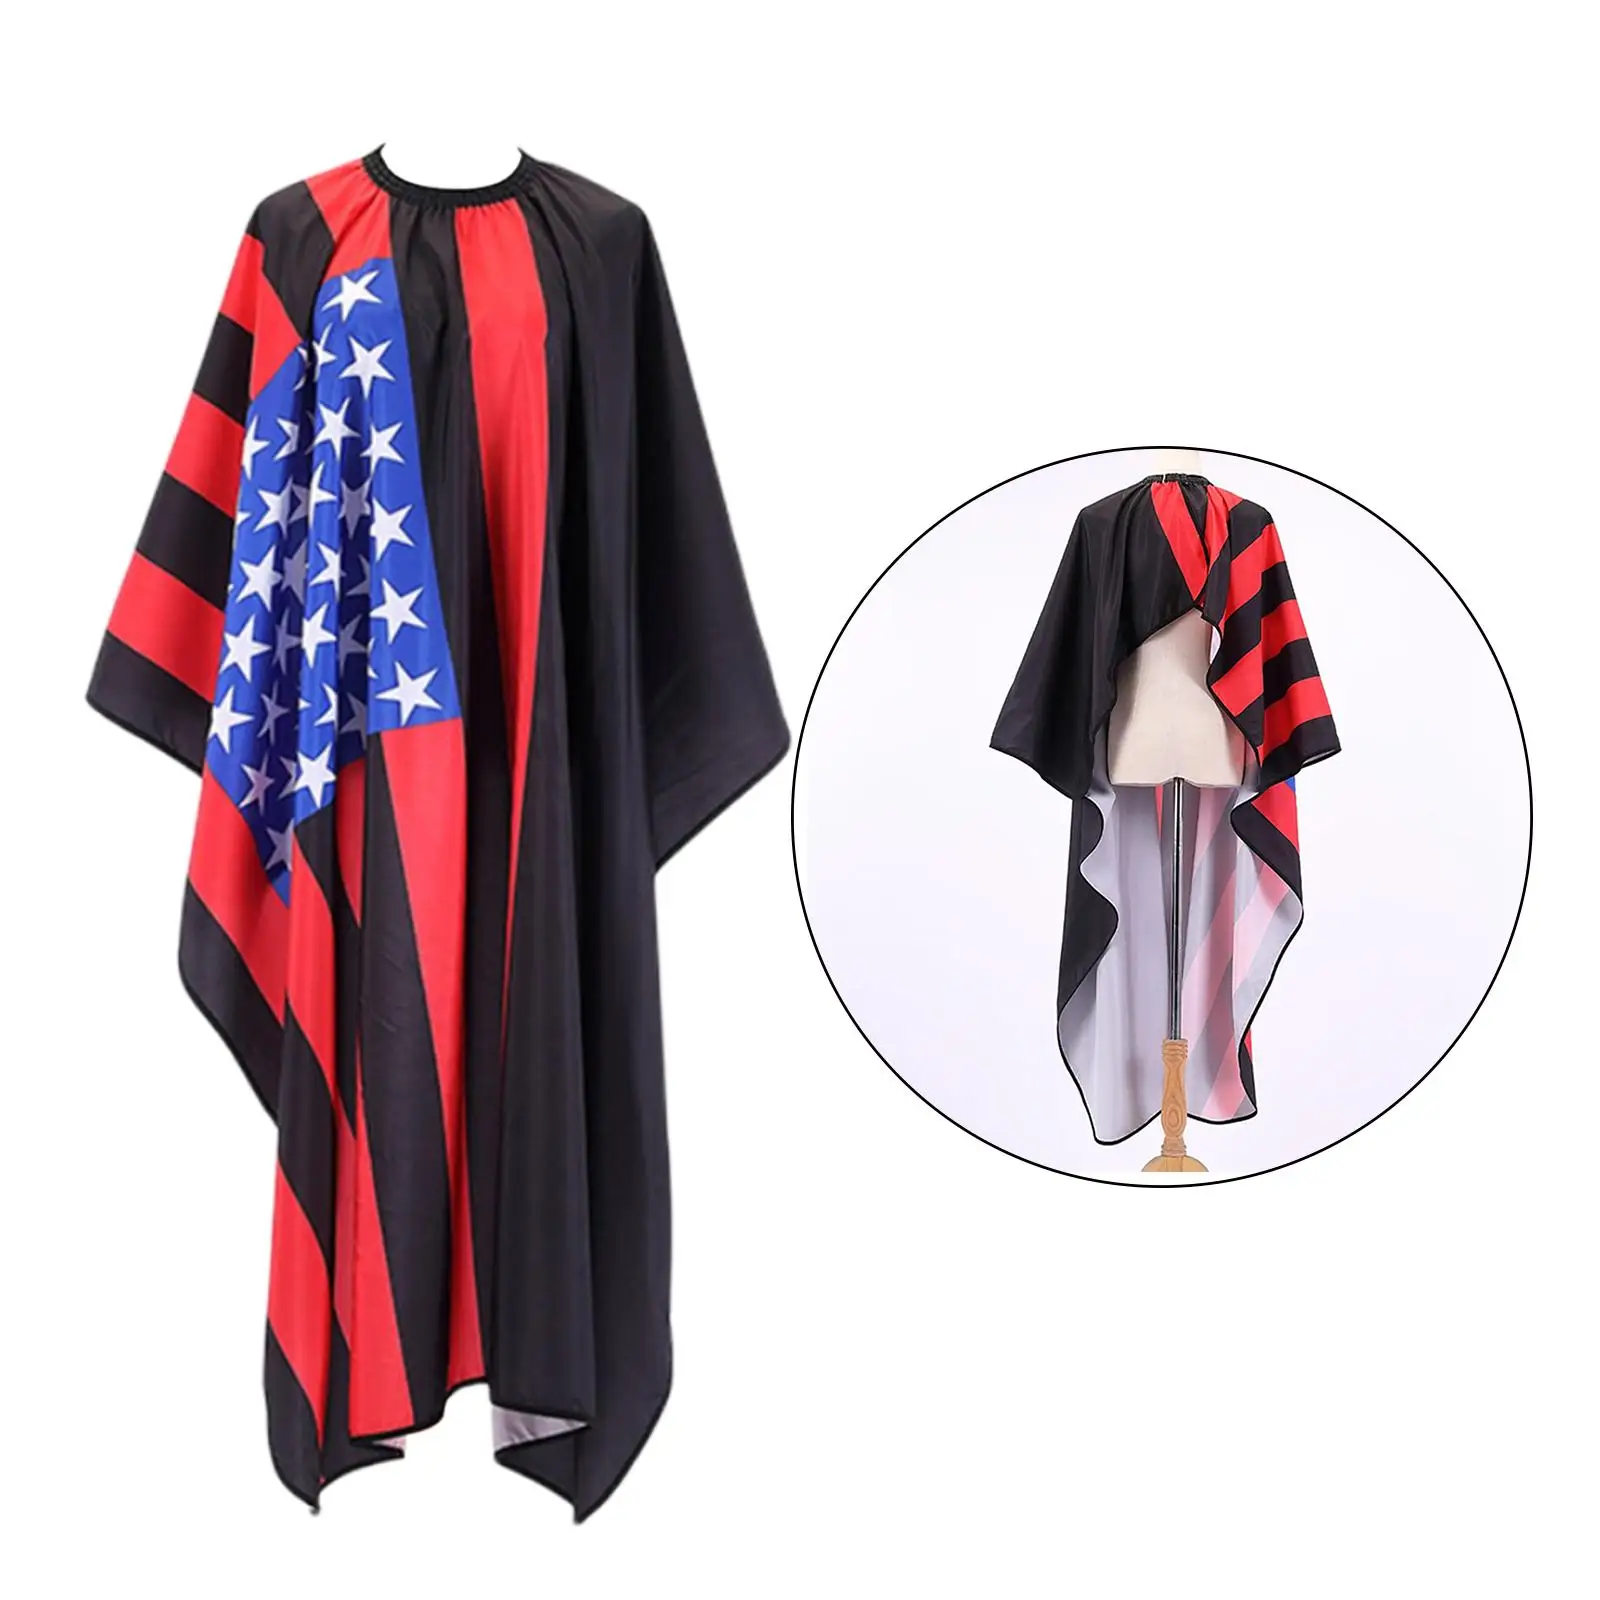 Haircuts Cape Apron Waterproof Fashion Easy Clean Anti Static Adjustable Neckline Perming for Barber Salon Cosmetology Supplies